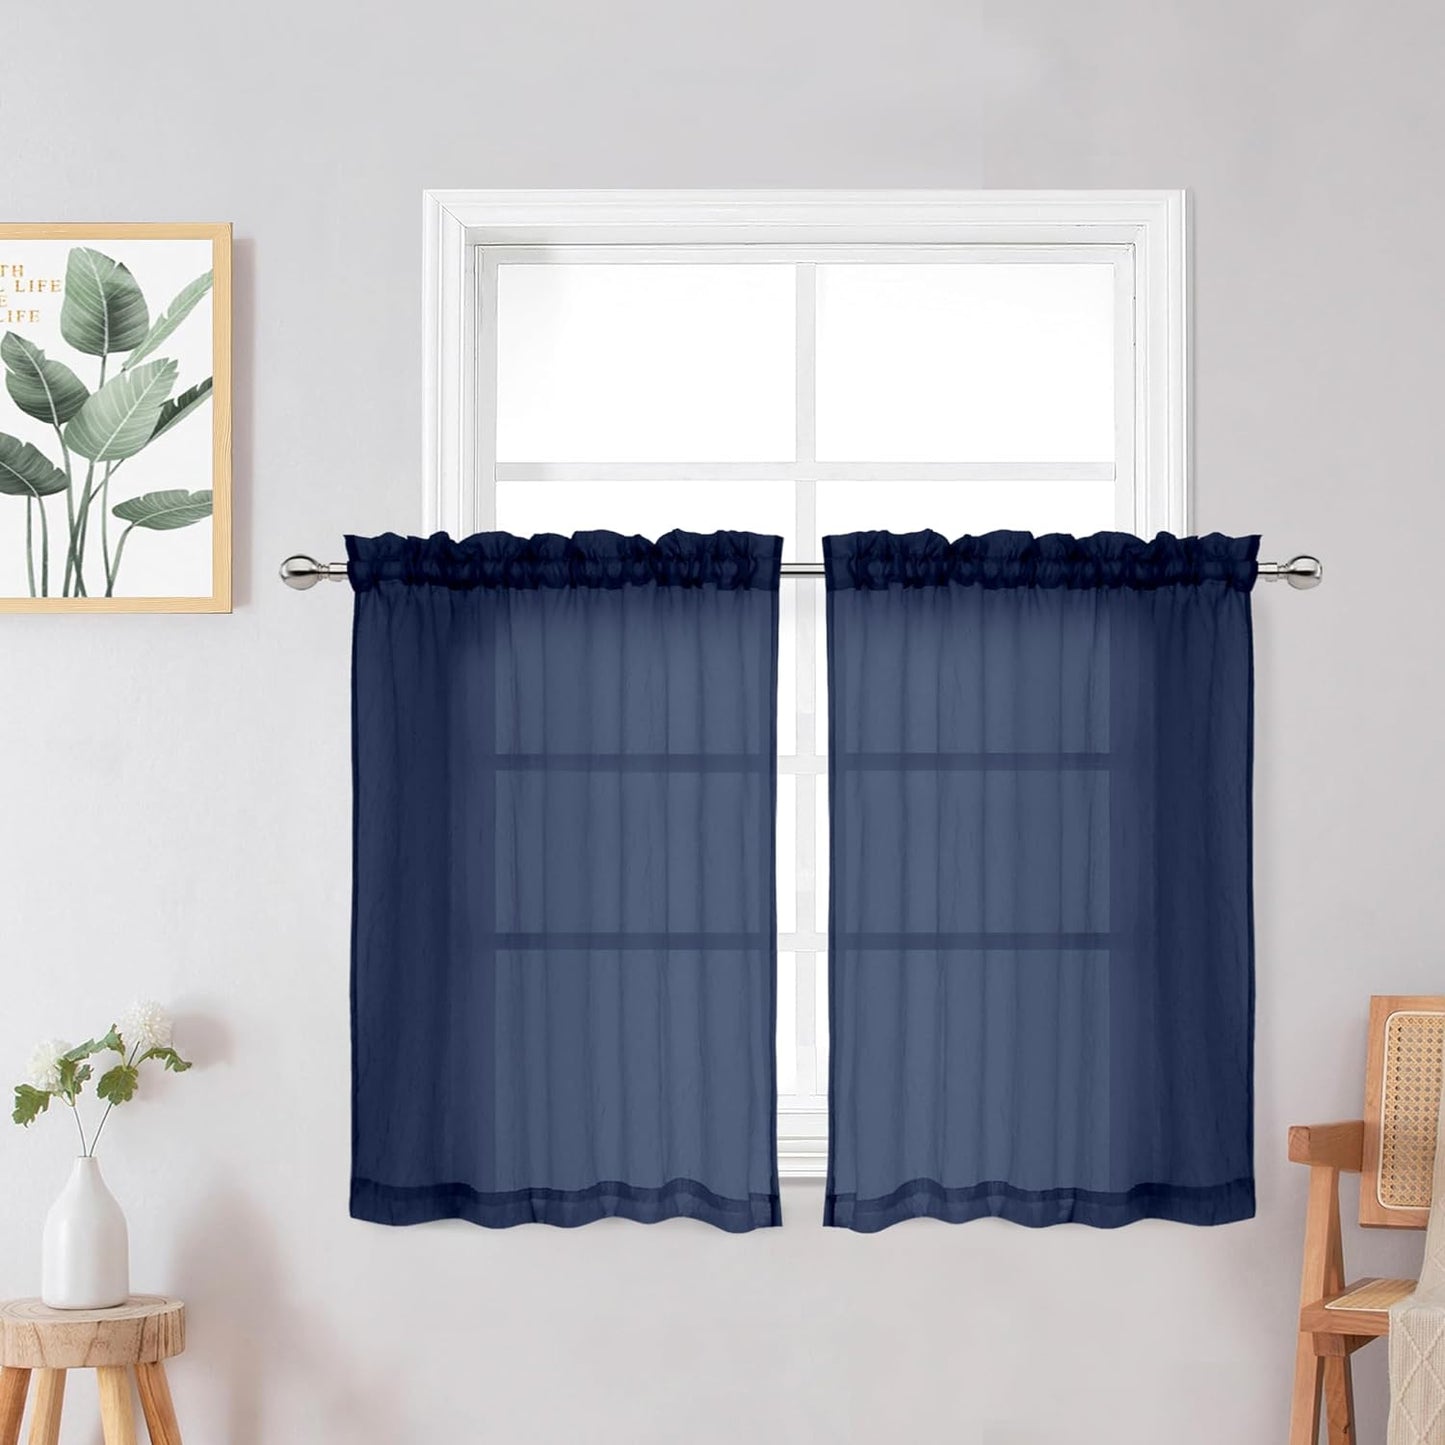 Chyhomenyc Crushed White Sheer Valances for Window 14 Inch Length 2 PCS, Crinkle Voile Short Kitchen Curtains with Dual Rod Pockets，Gauzy Bedroom Curtain Valance，Each 42Wx14L Inches  Chyhomenyc Navy Blue 28 W X 24 L 